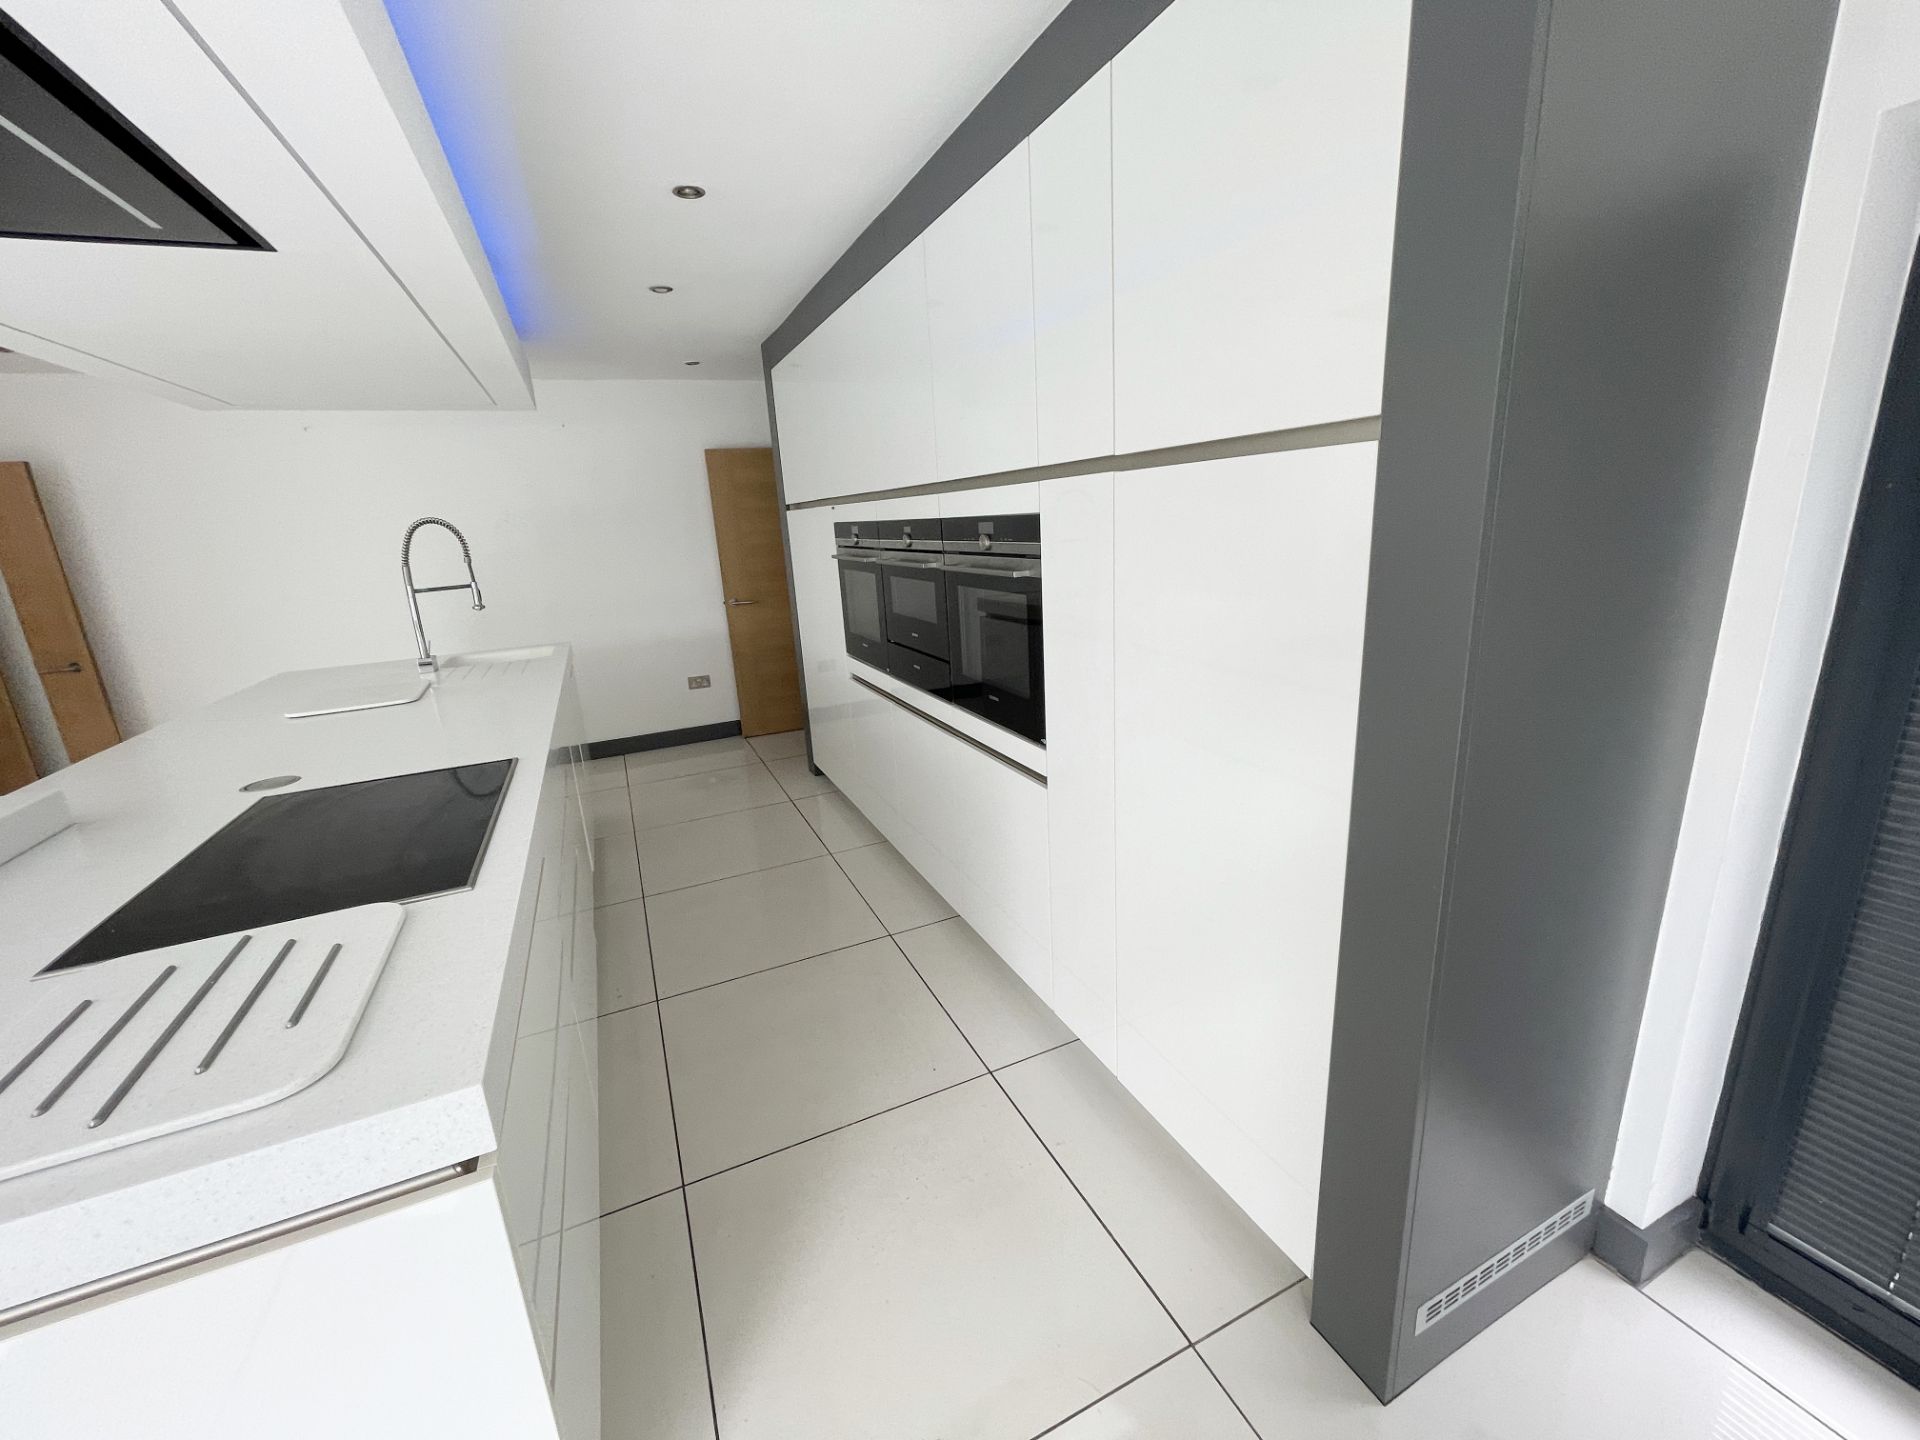 1 x SieMatic Contemporary Fitted Kitchen With Branded Appliances, Central Island + Corian Worktops - Image 17 of 100